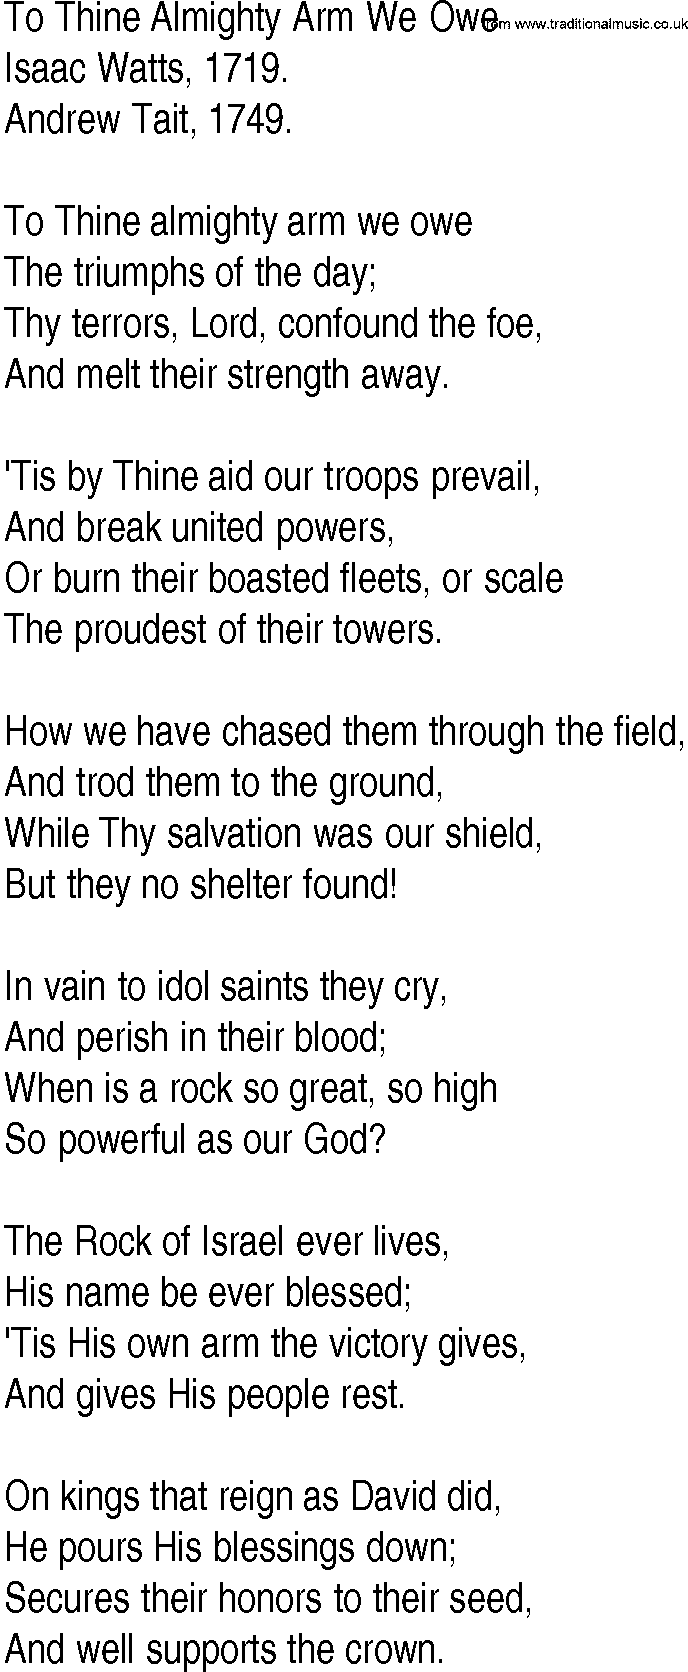 Hymn and Gospel Song: To Thine Almighty Arm We Owe by Isaac Watts lyrics